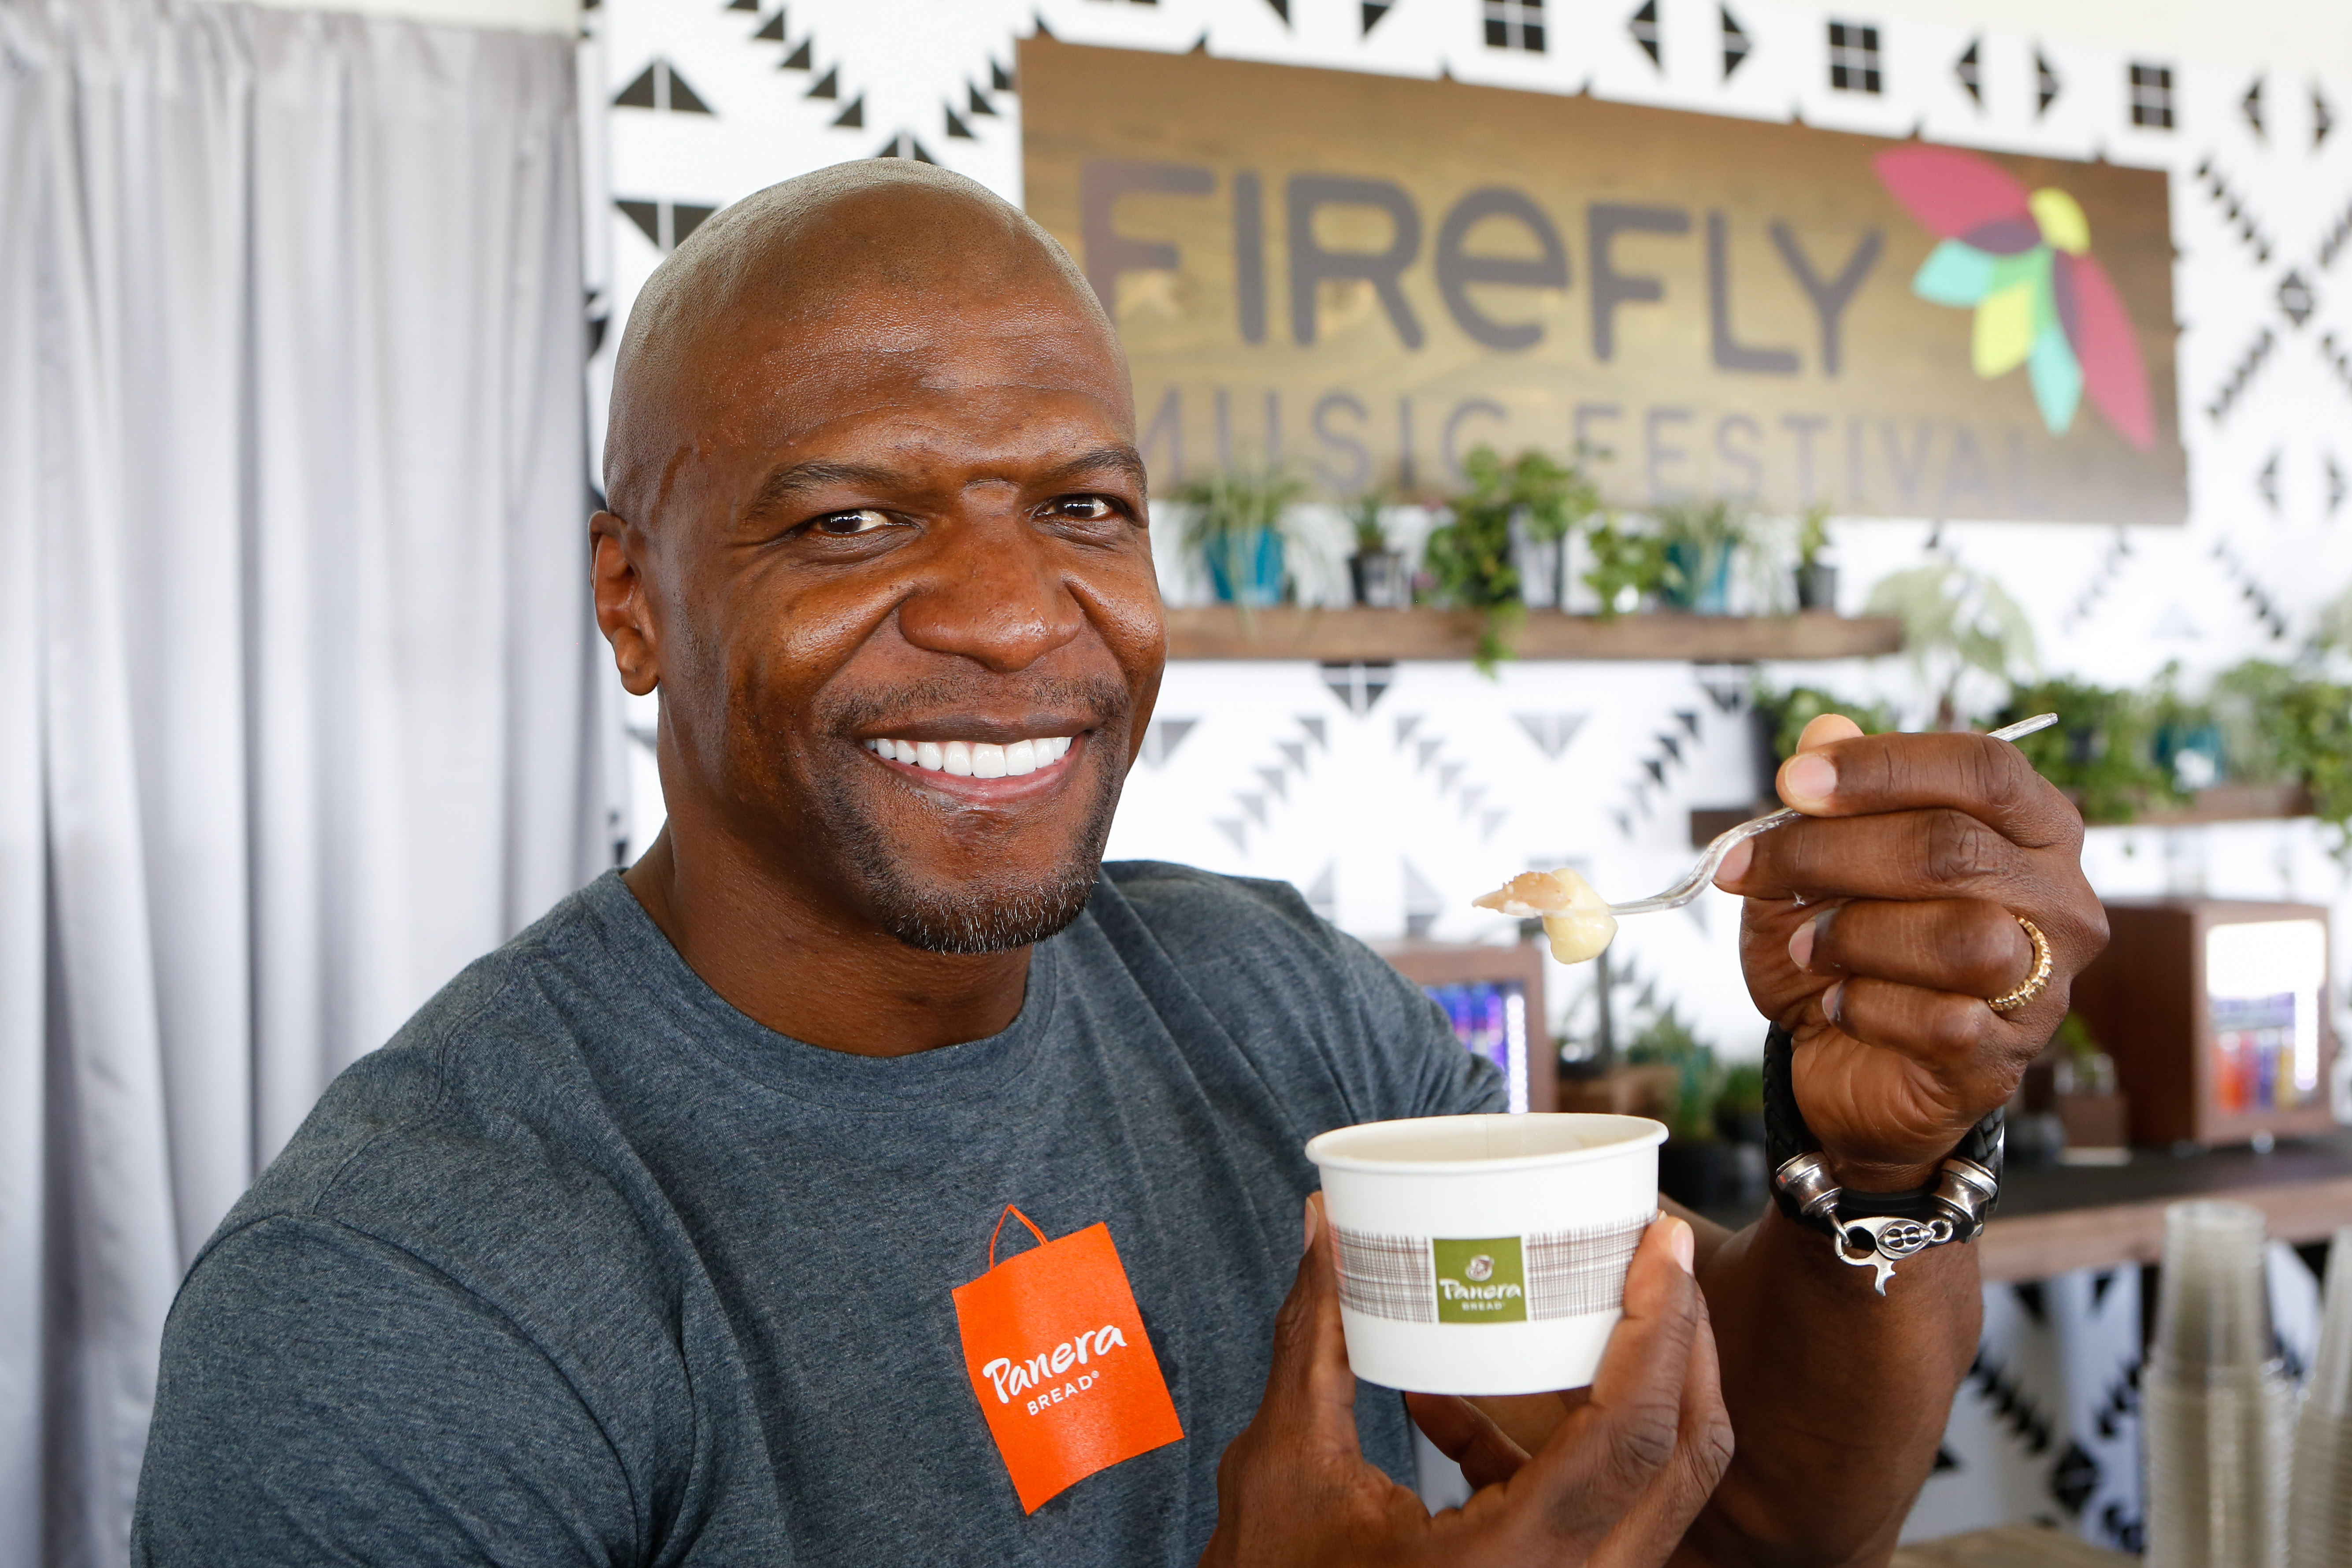 Terry crews mac and cheese recipe